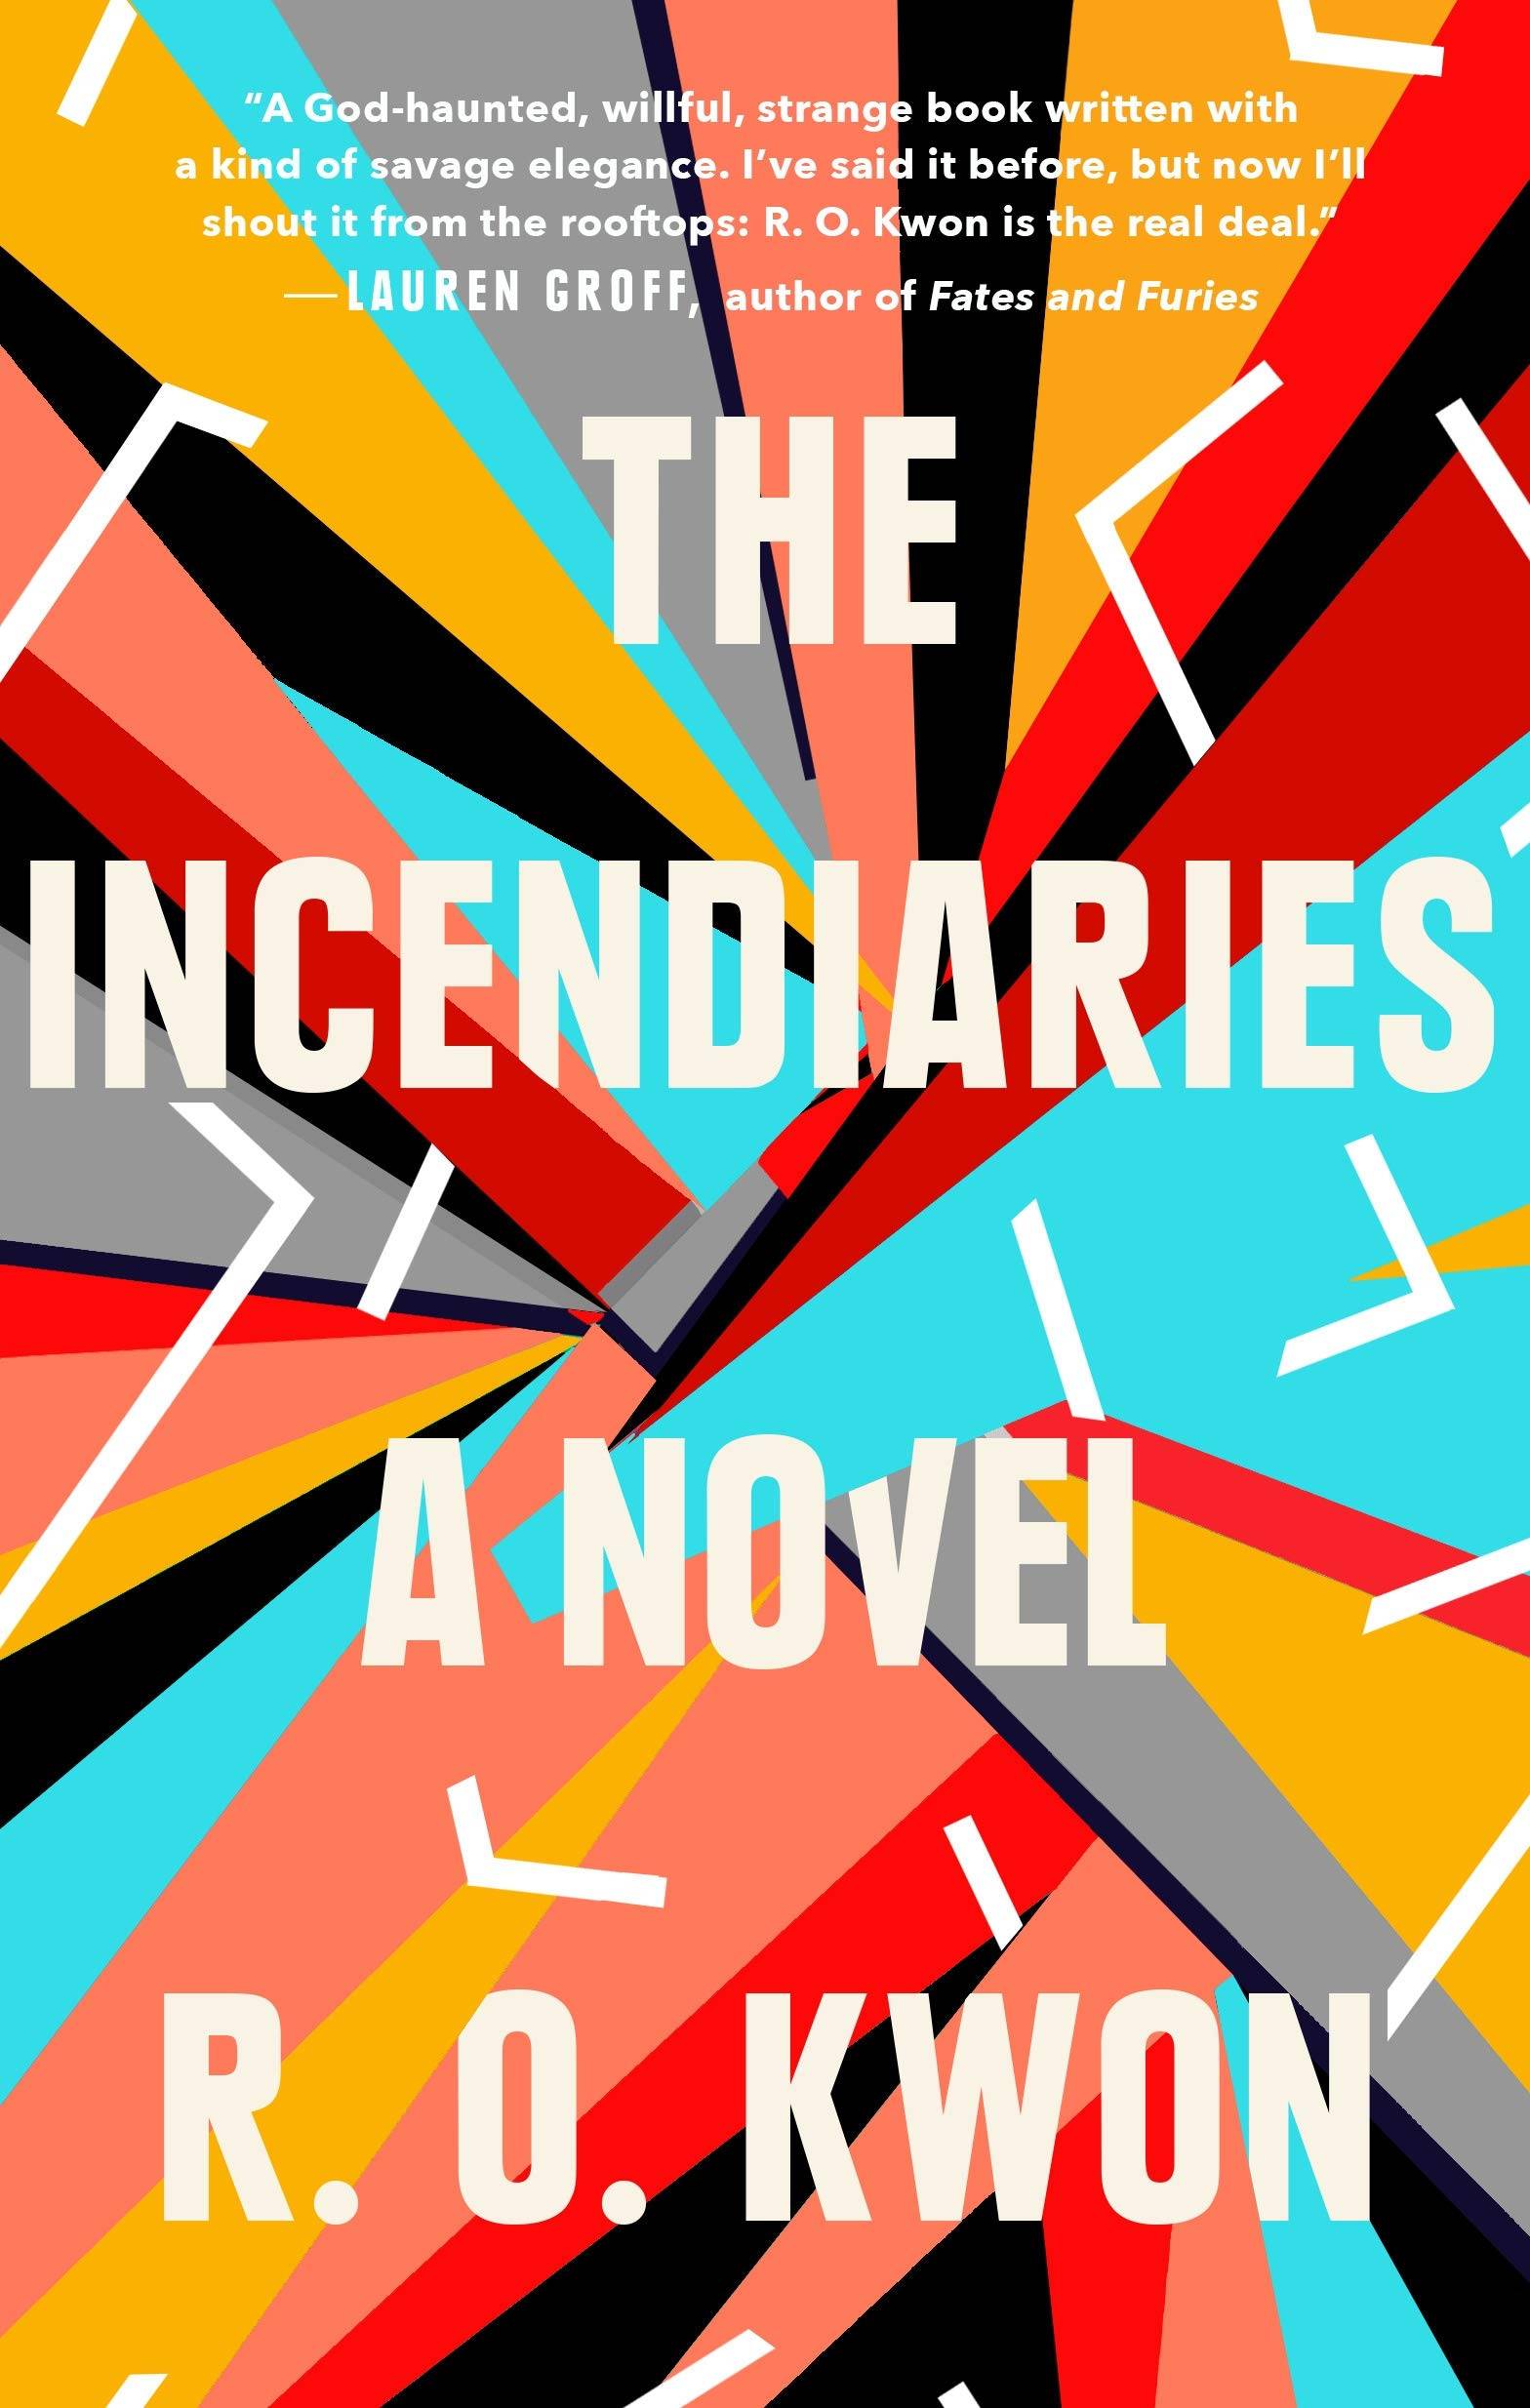 Colorful "The Incendiaries" book cover with lots of triangular and geometric colorful shapes coming out from the center.